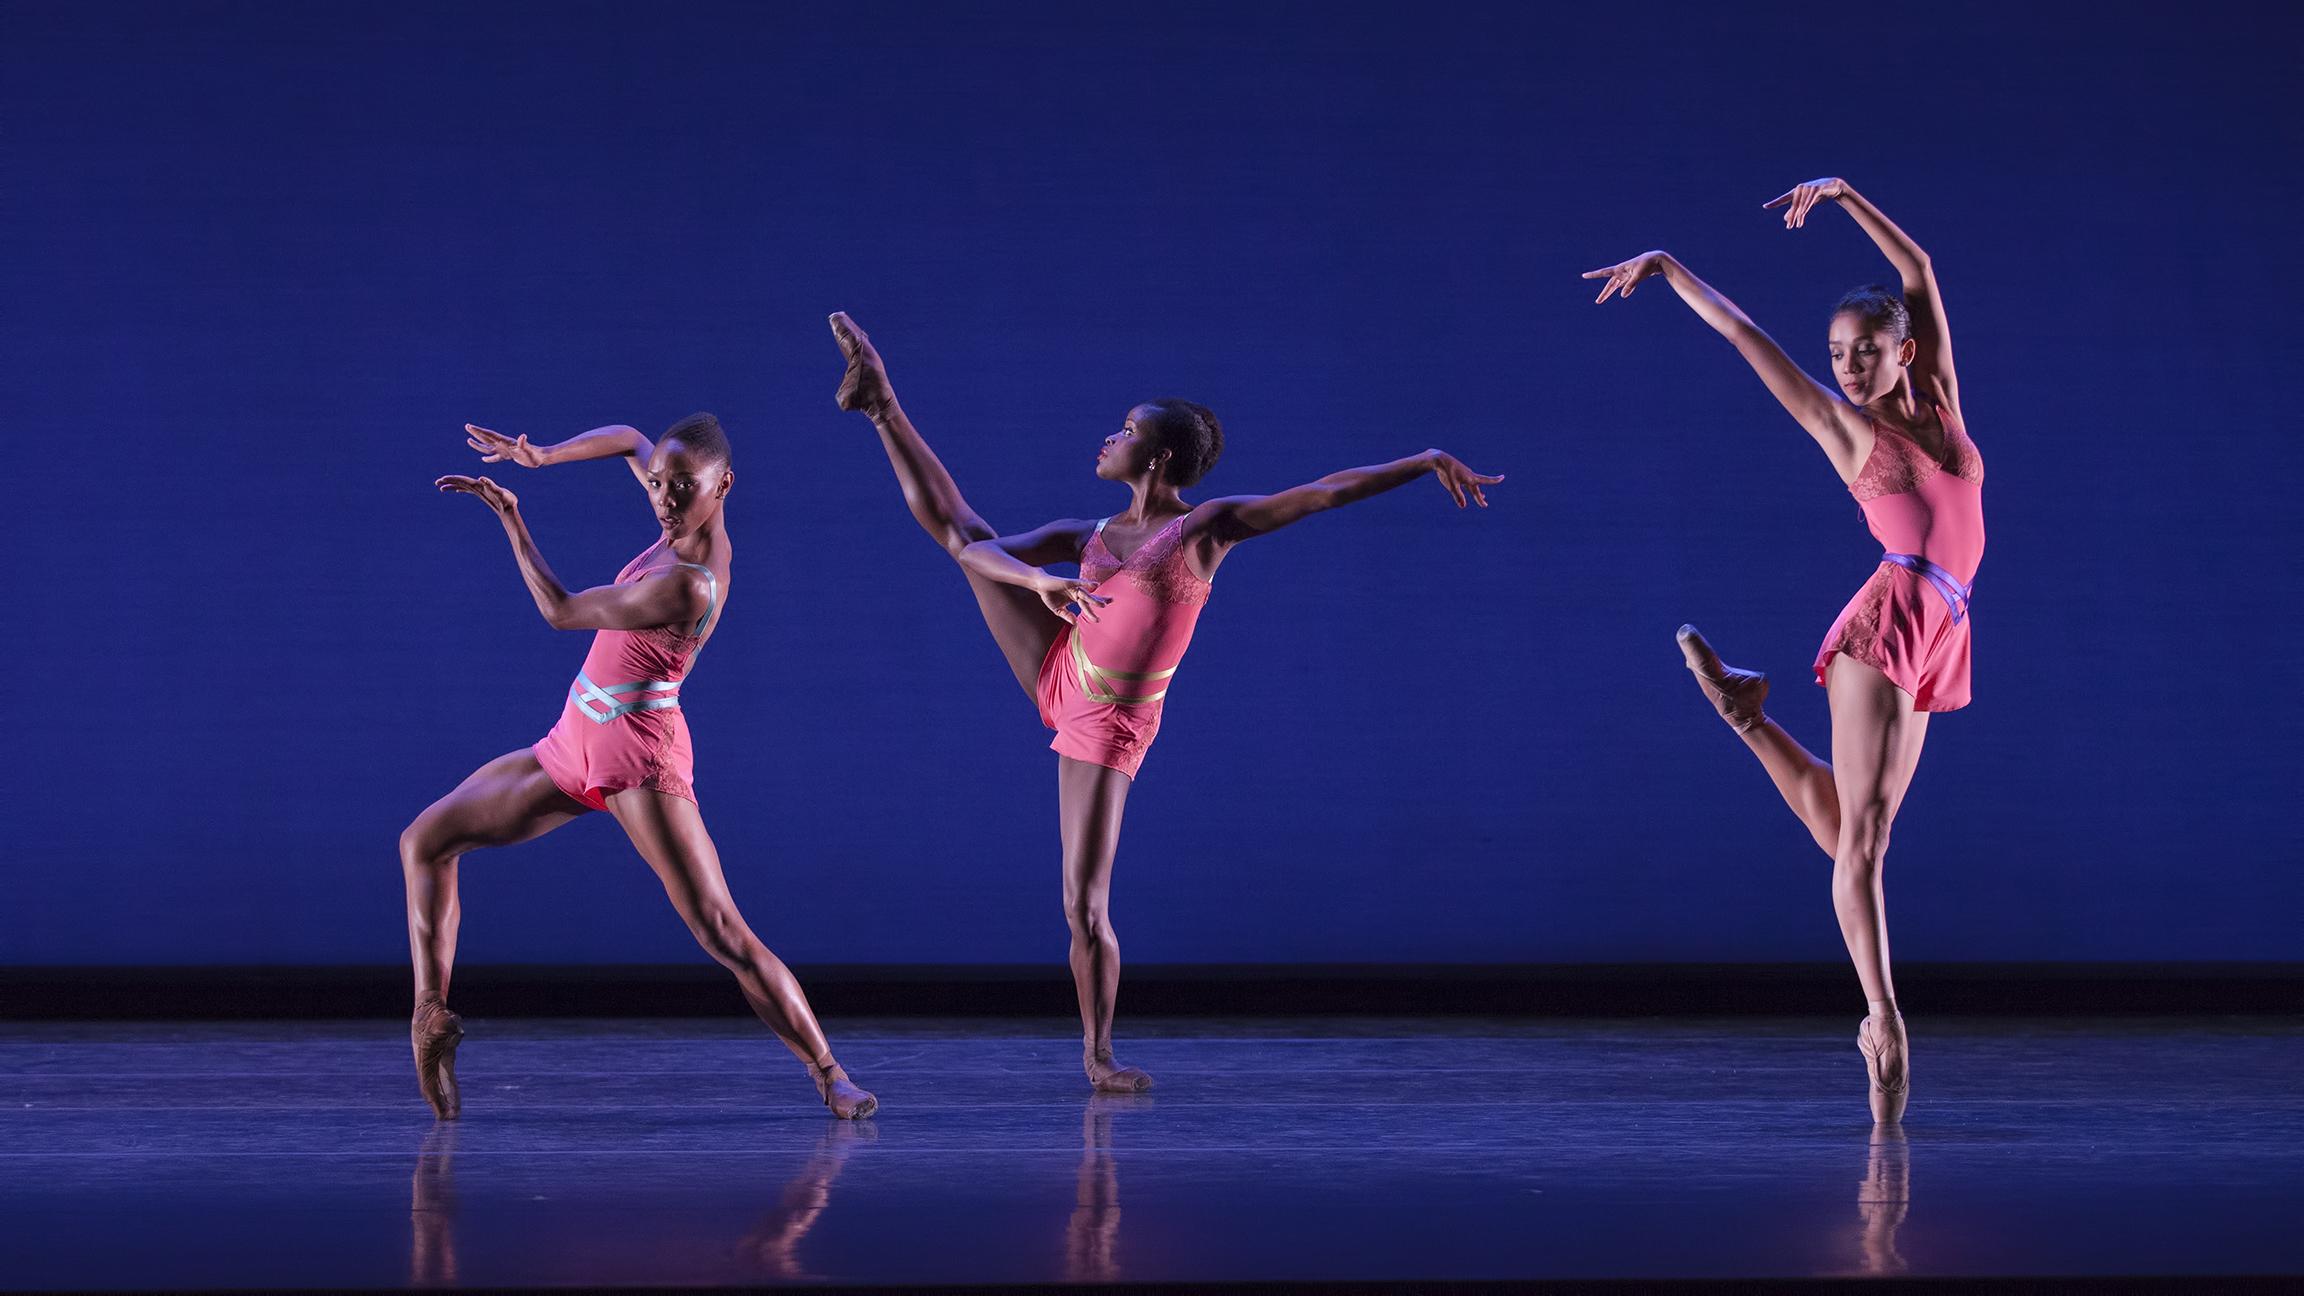 African-American and other racially diverse ballet dancers take the stage this weekend. (Renata Pavam / Dance Theatre of Harlem)